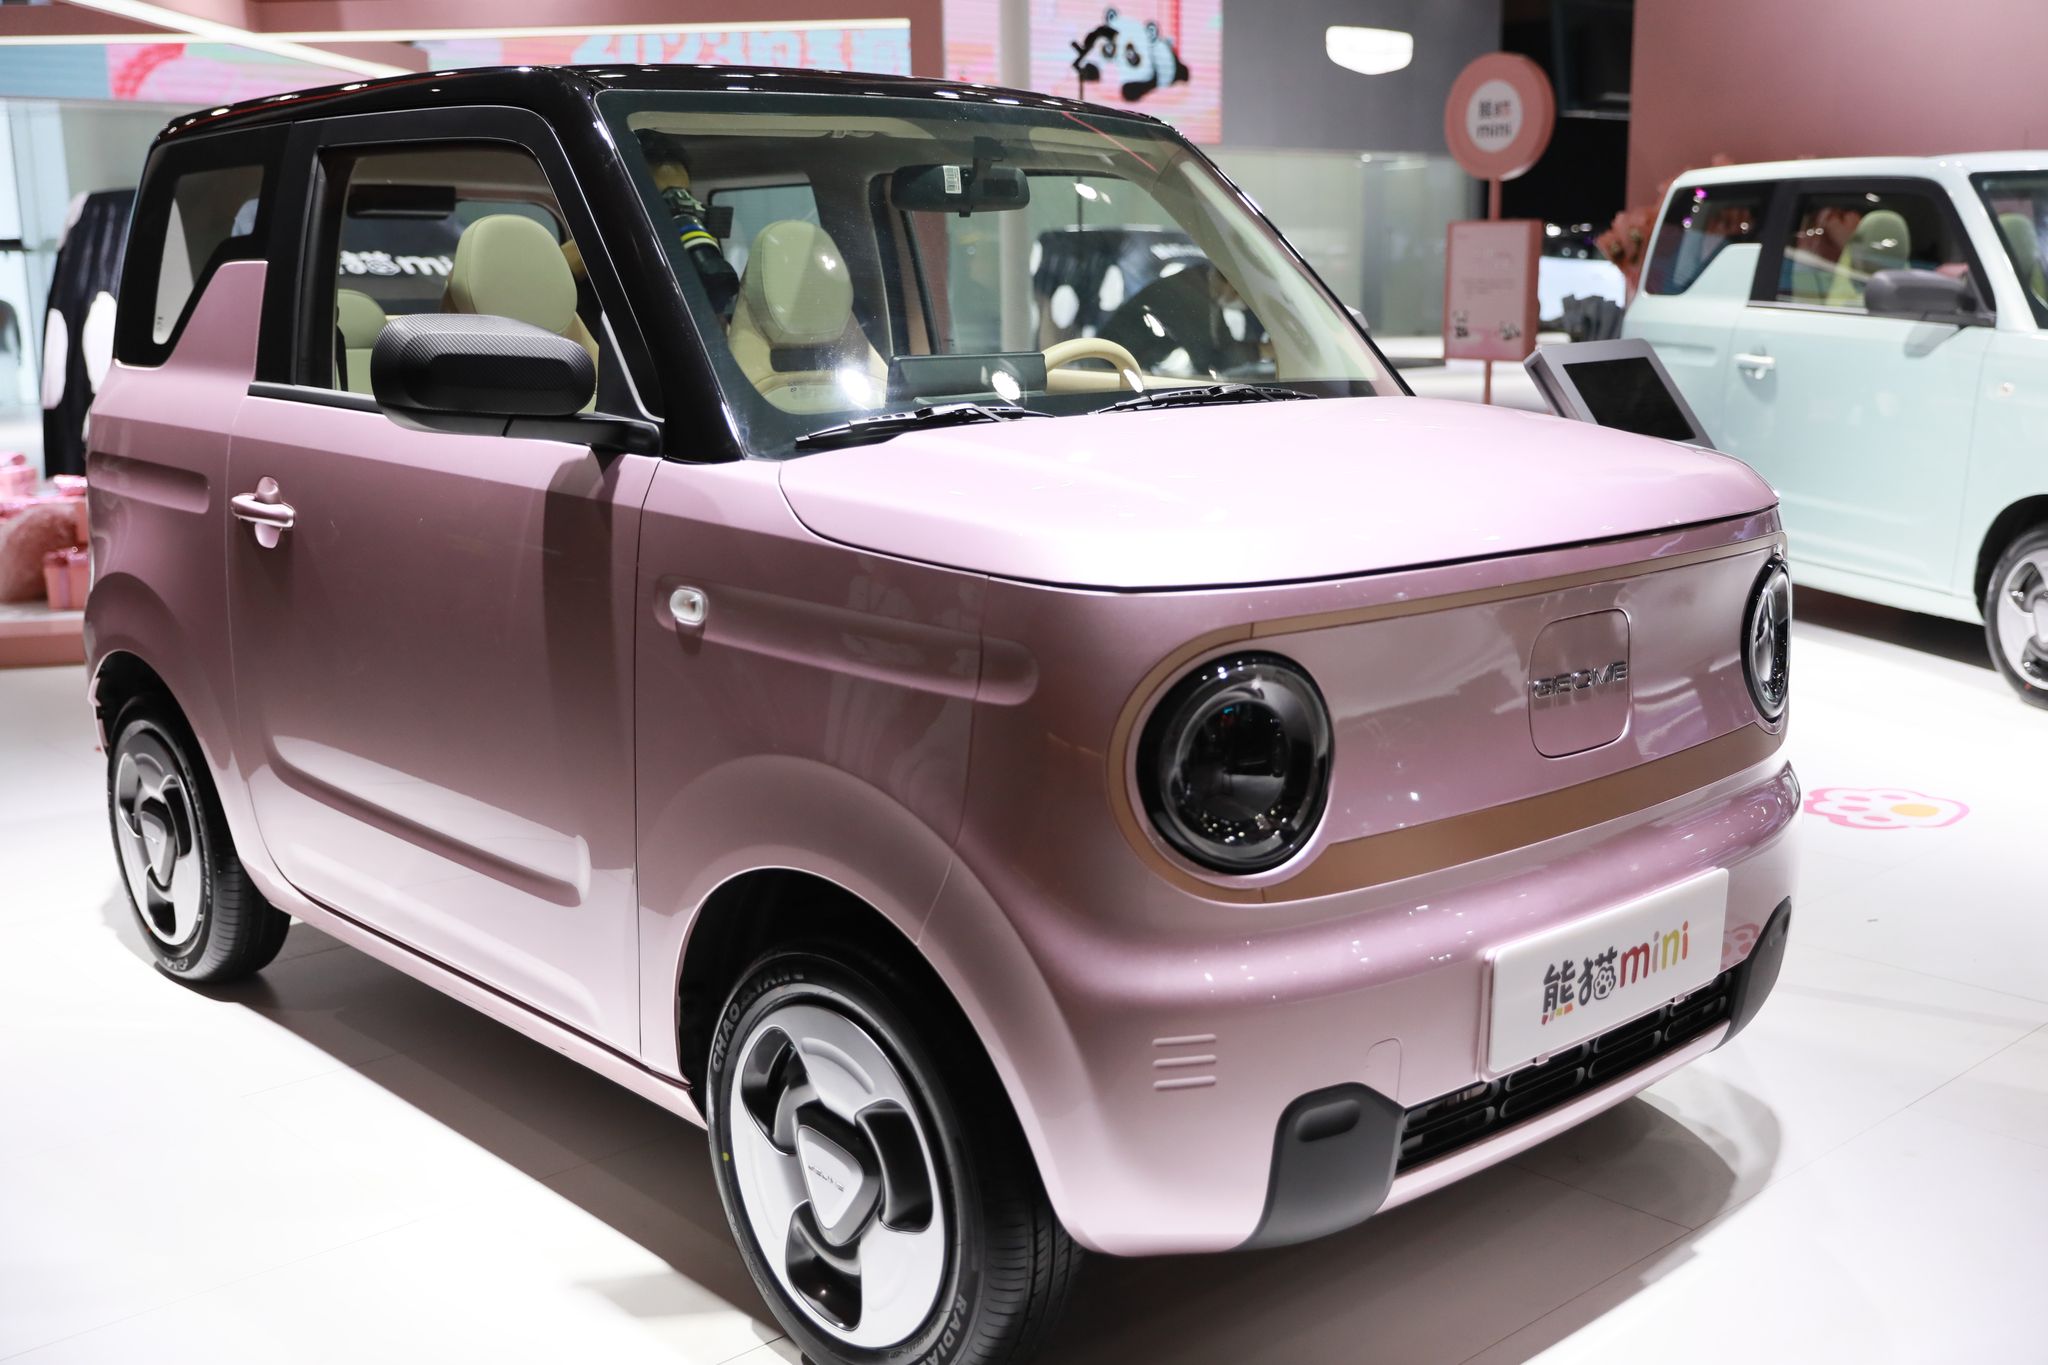 guangzhou, china december 30 a geely panda geome mini ev is on display during the 20th guangzhou international automobile exhibition at canton fair complex on december 30, 2022 in guangzhou, guangdong province of china photo by vcgvcg via getty images